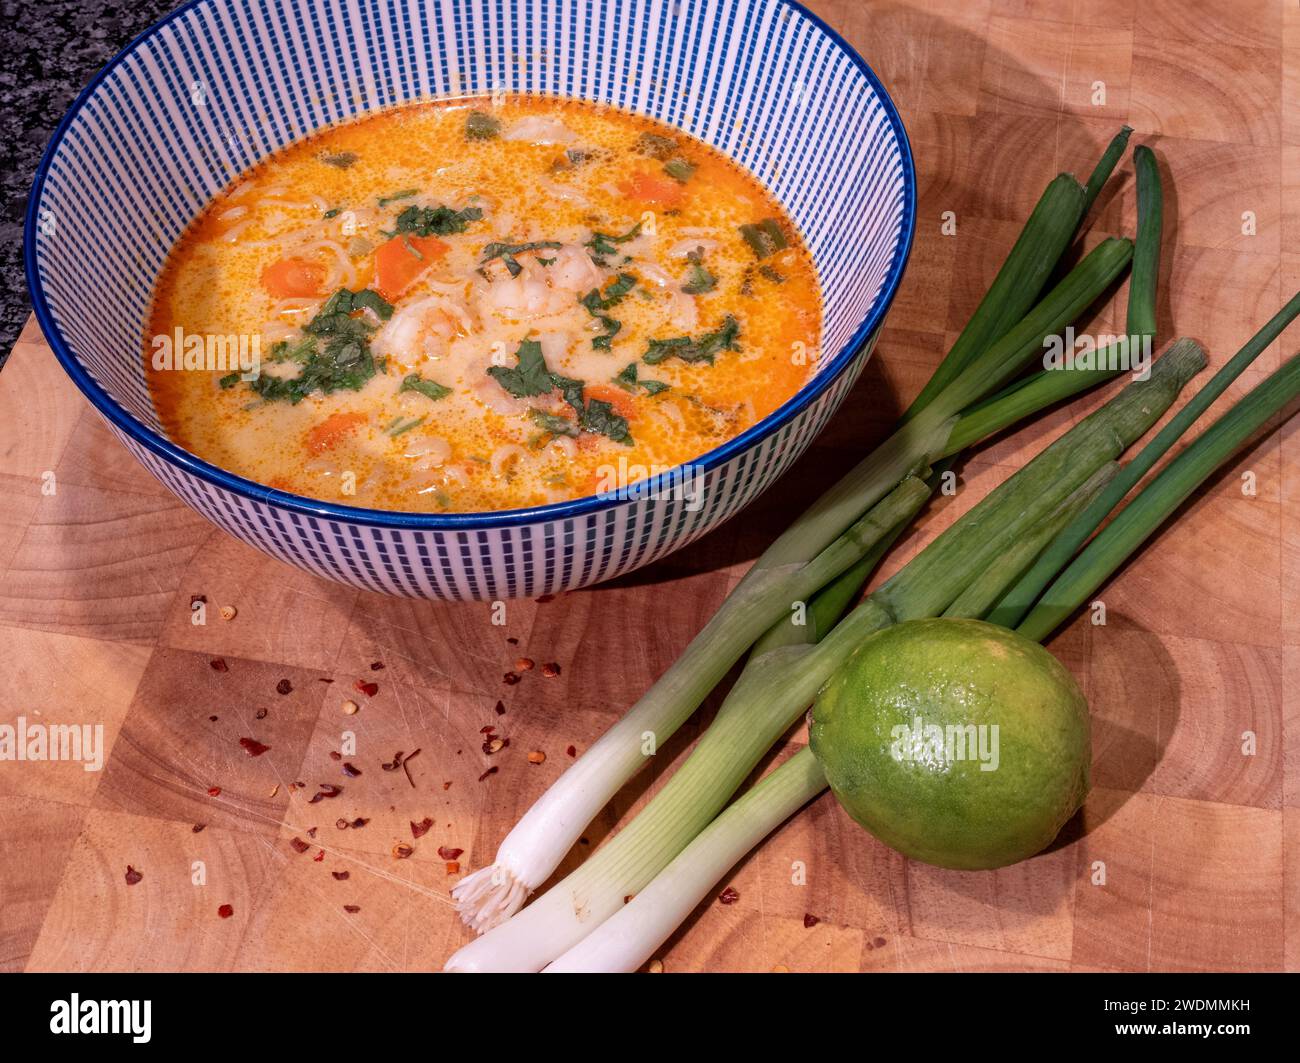 Savor the rich flavors of a zesty Asian coconut soup infused with red curry paste, elegantly presented in a blue bowl atop a wooden block. Accompanied Stock Photo